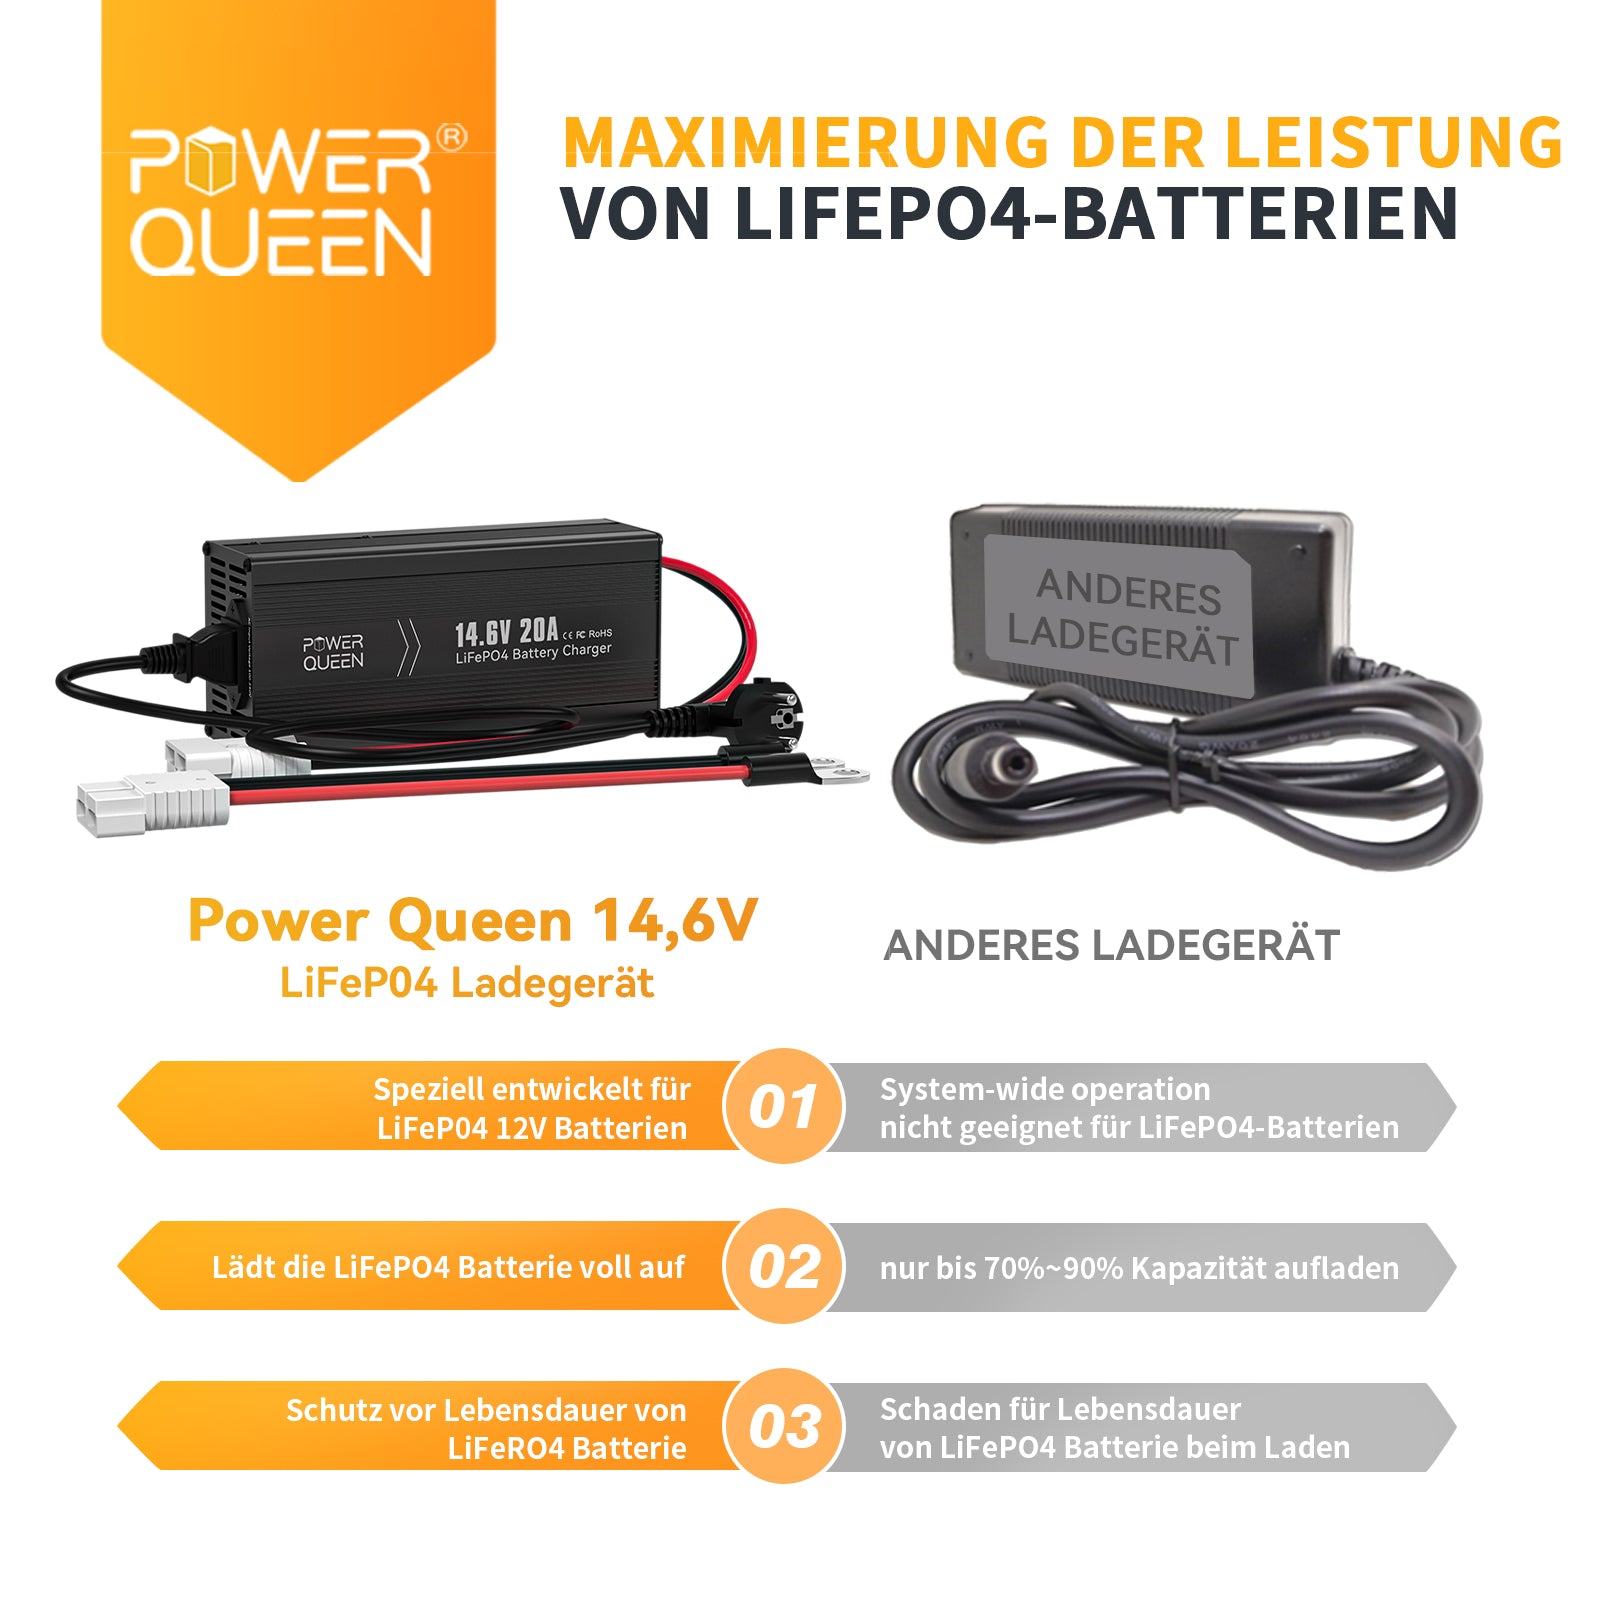 Power Queen 14.6V 20A LiFePO4 charger for 12V LiFePO4 battery